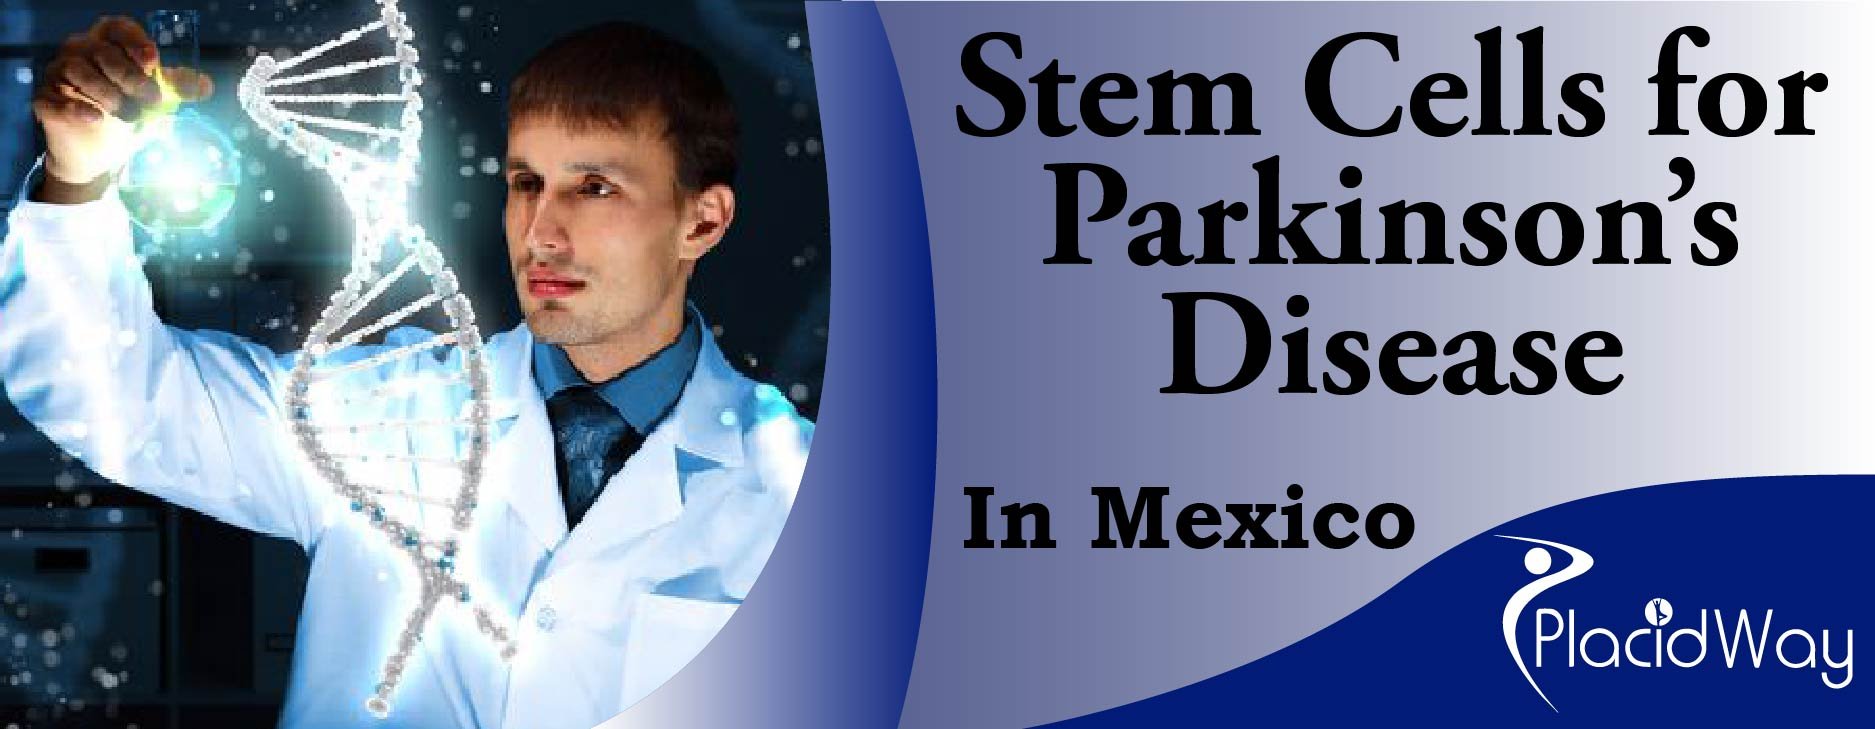 Parkinson?s disease in Mexico, Stem Cell Therapy for Parkinson?s disease